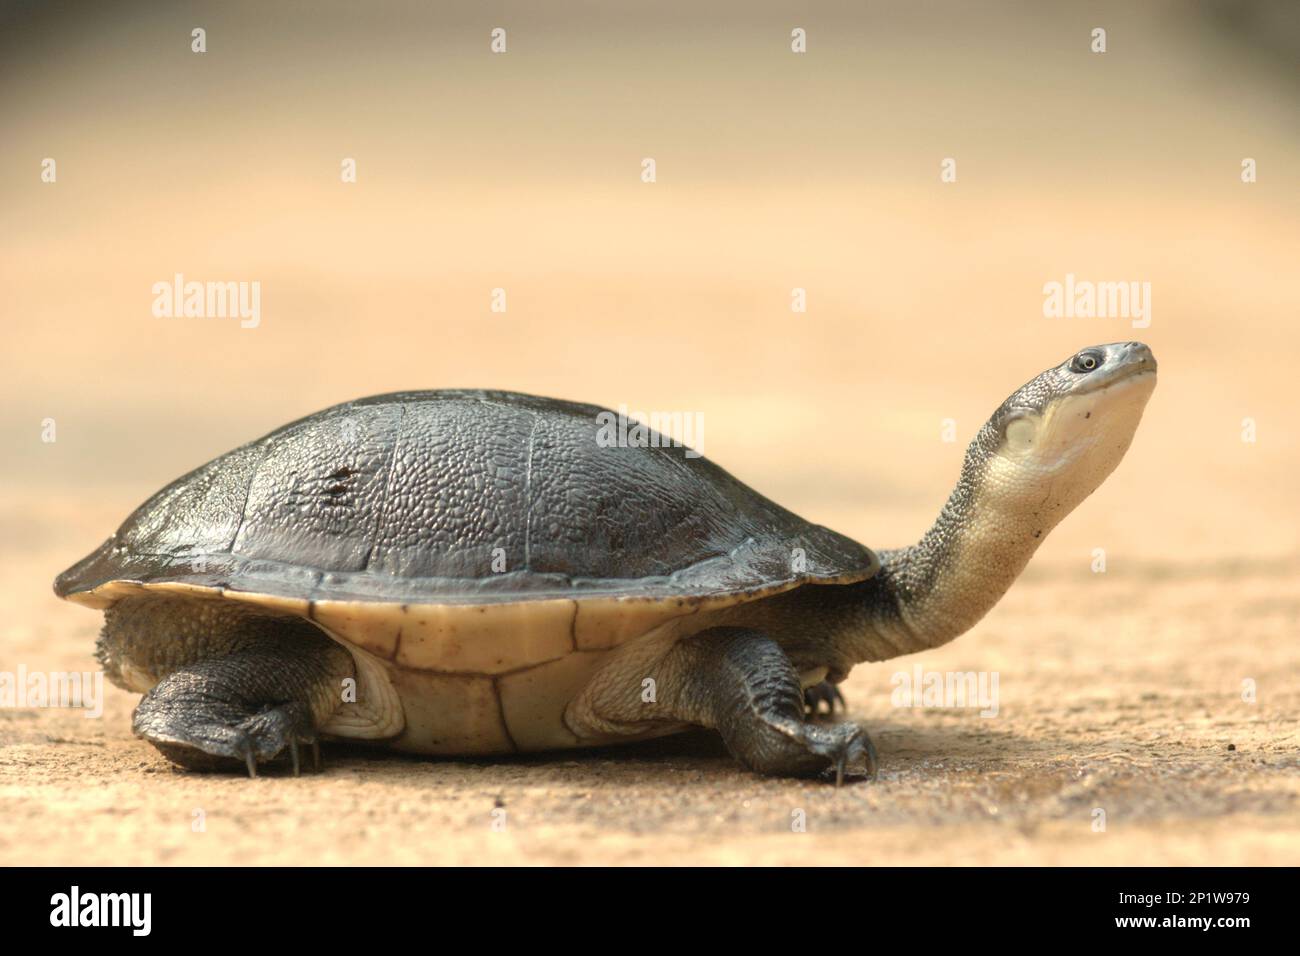 A rare and threatened species of freshwater turtle, the critically endangered Rote Island's endemic snake-necked turtle (Chelodina mccordi) is photographed at a licensed ex-situ breeding facility in Jakarta, Indonesia. 'The Rote Island snake-necked turtle is one glaring example of how unsustainable trade has brought entire species to the brink of extinction,' said Jim Breheny, Wildlife Conservation Society (WCS) Executive Vice President and Director of the Bronx Zoo as published by WCS Newsroom on September 7, 2022. Stock Photo